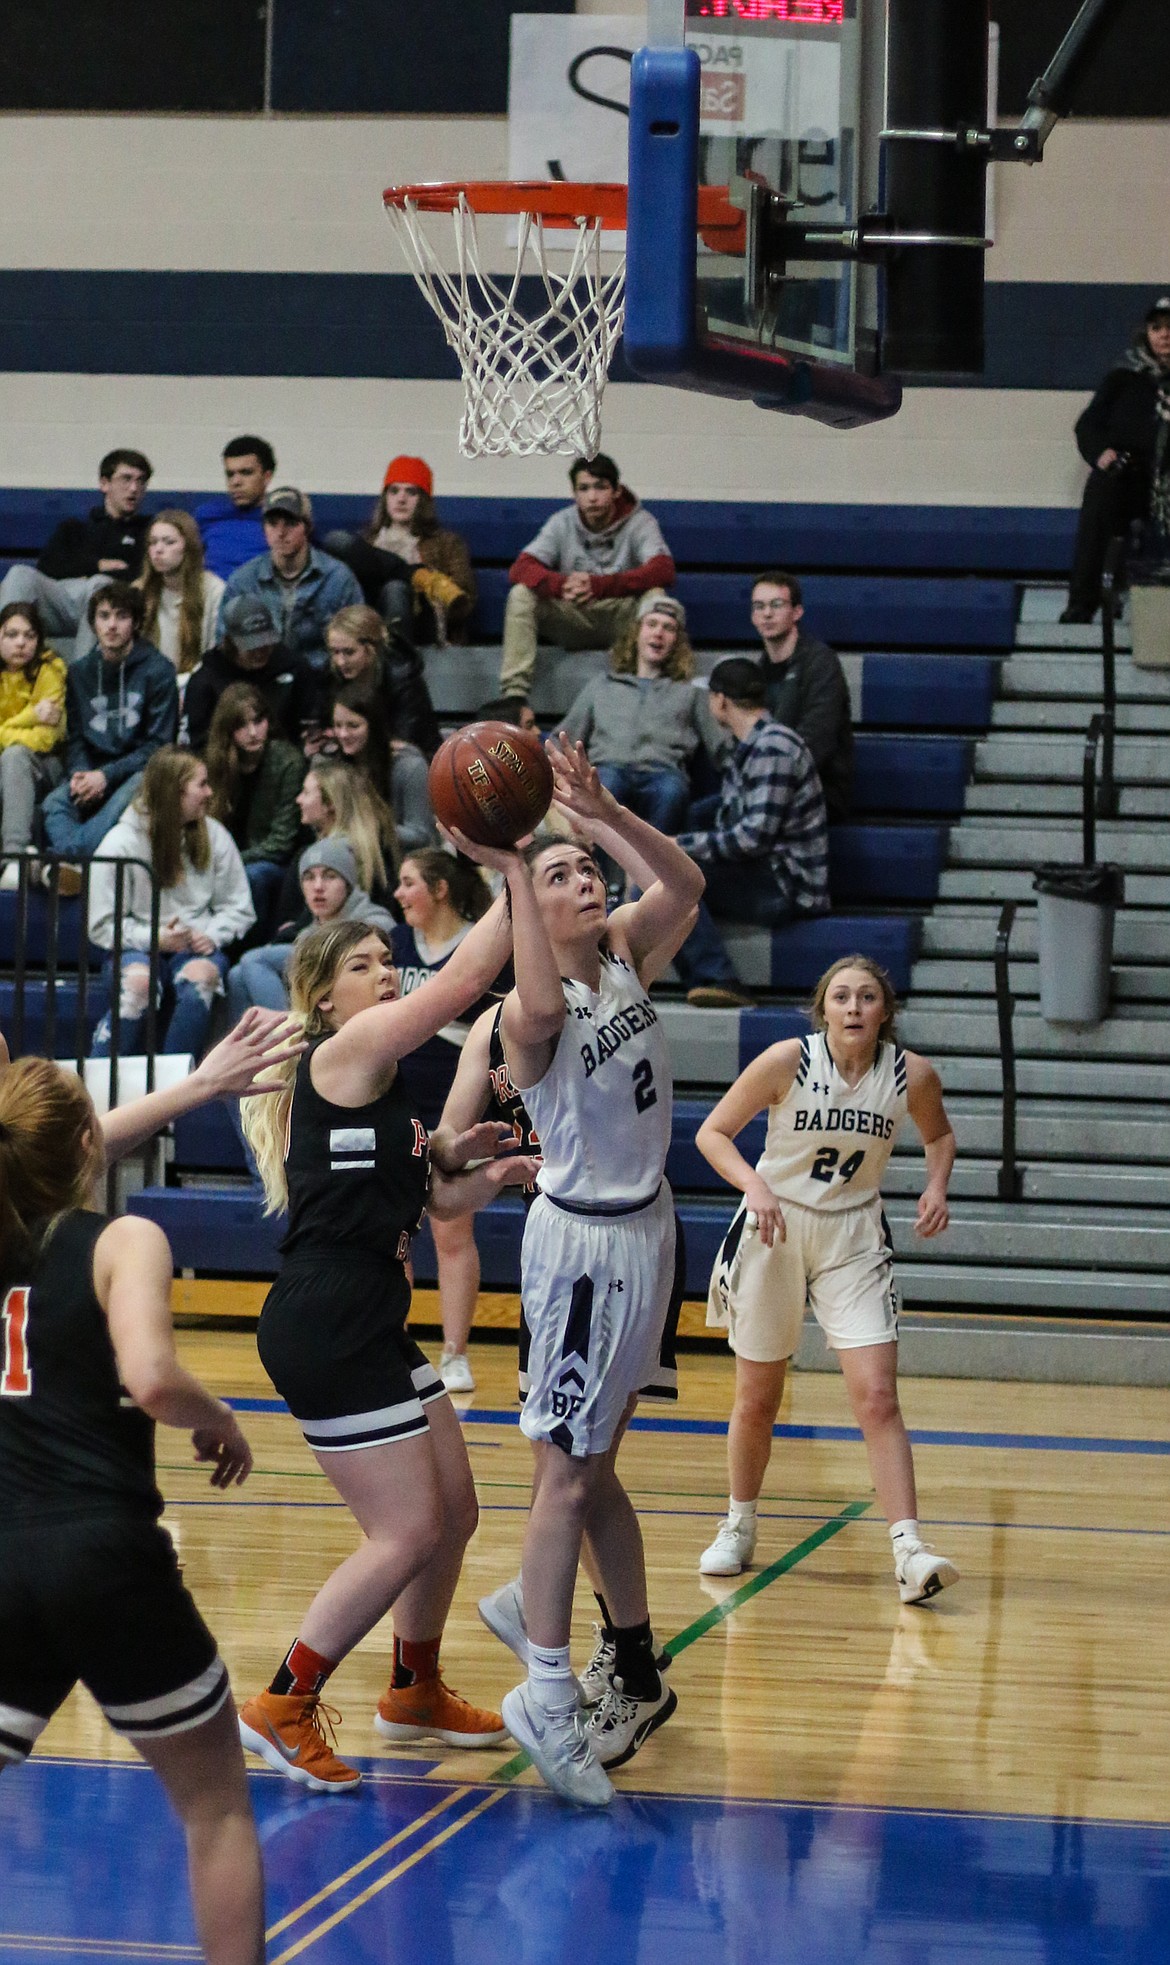 Photo by MANDI BATEMAN 
The Badgers came out on top with a score of 63-24 against the Priest River Spartans.